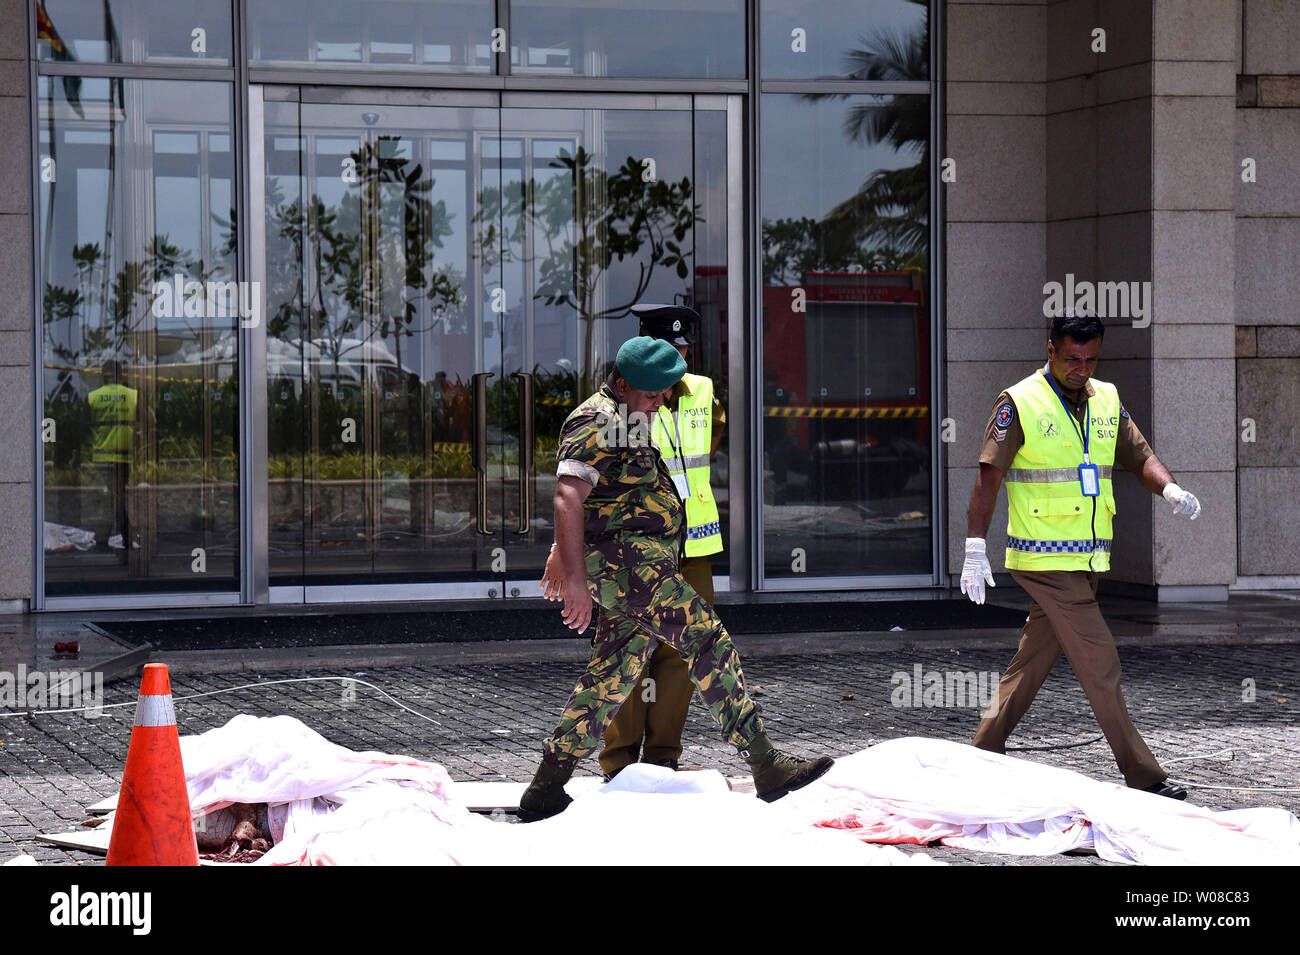 Police and investigators work at a blast scene at Shangri-La hotel in  Colombo, Sri Lanka, April 21, 2019. A series of eight devastating bomb  blasts ripped through high-end hotels and churches holding